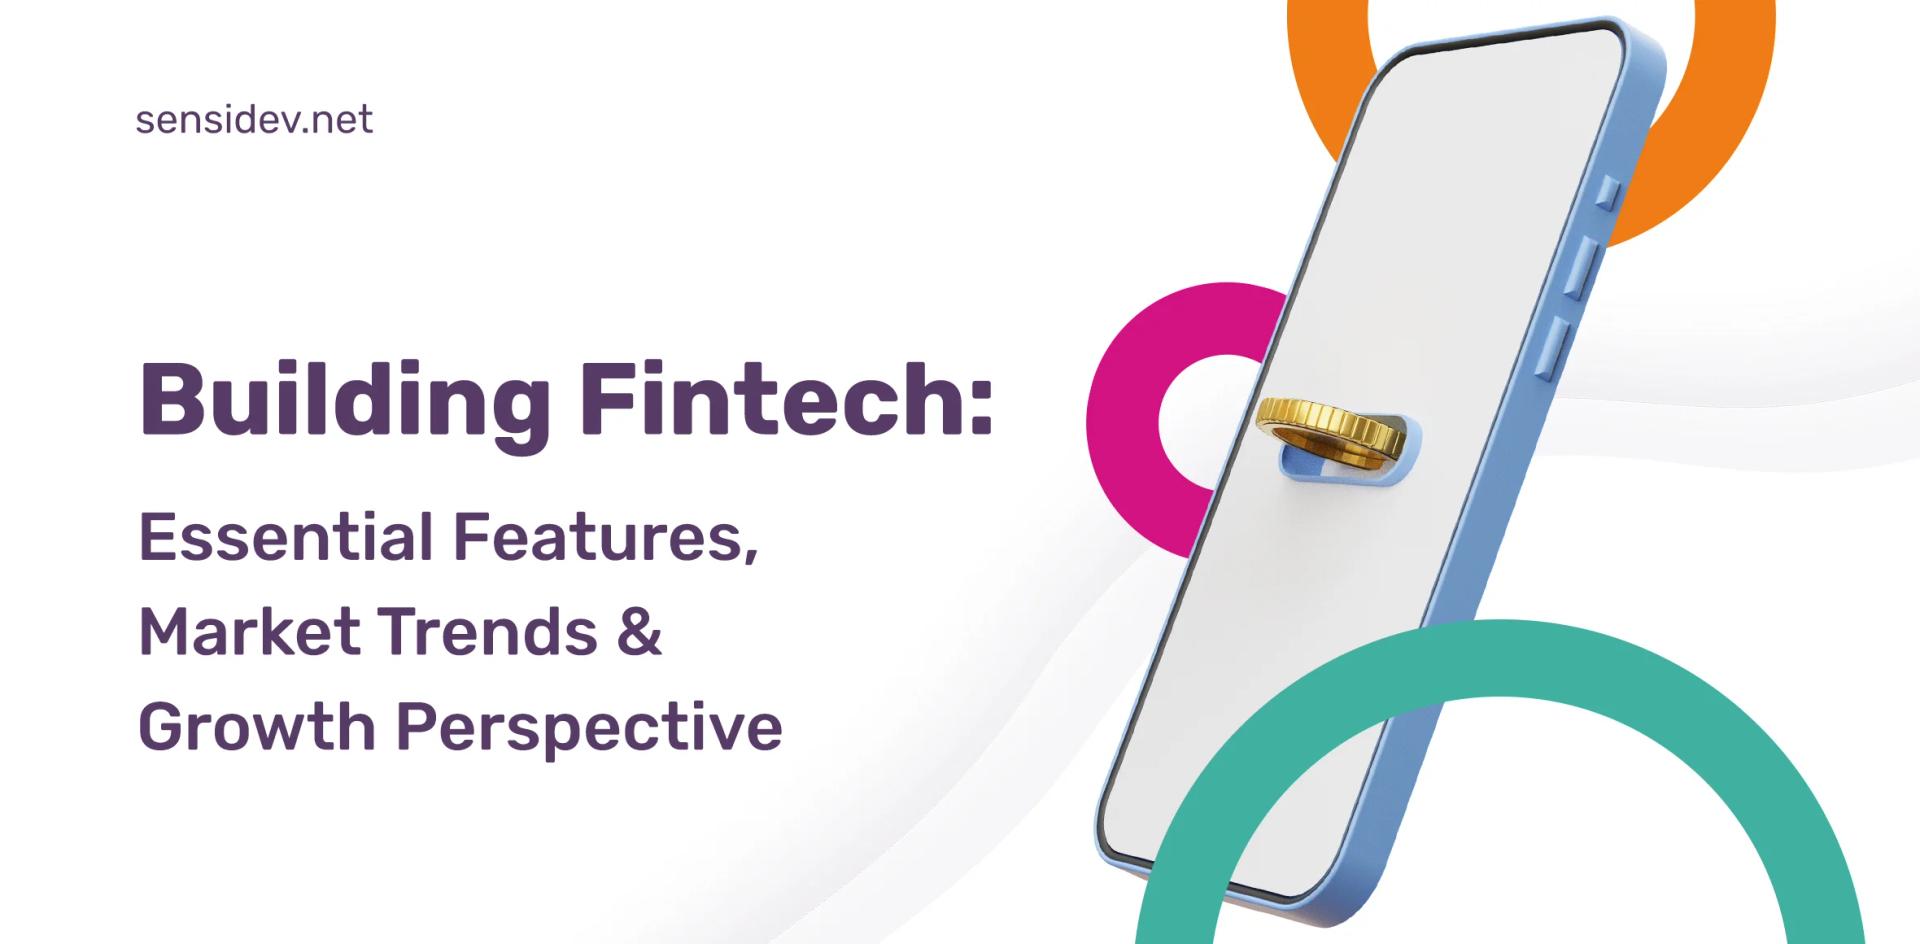 Building Fintech: Essential Features, Market Trends & Growth Perspective